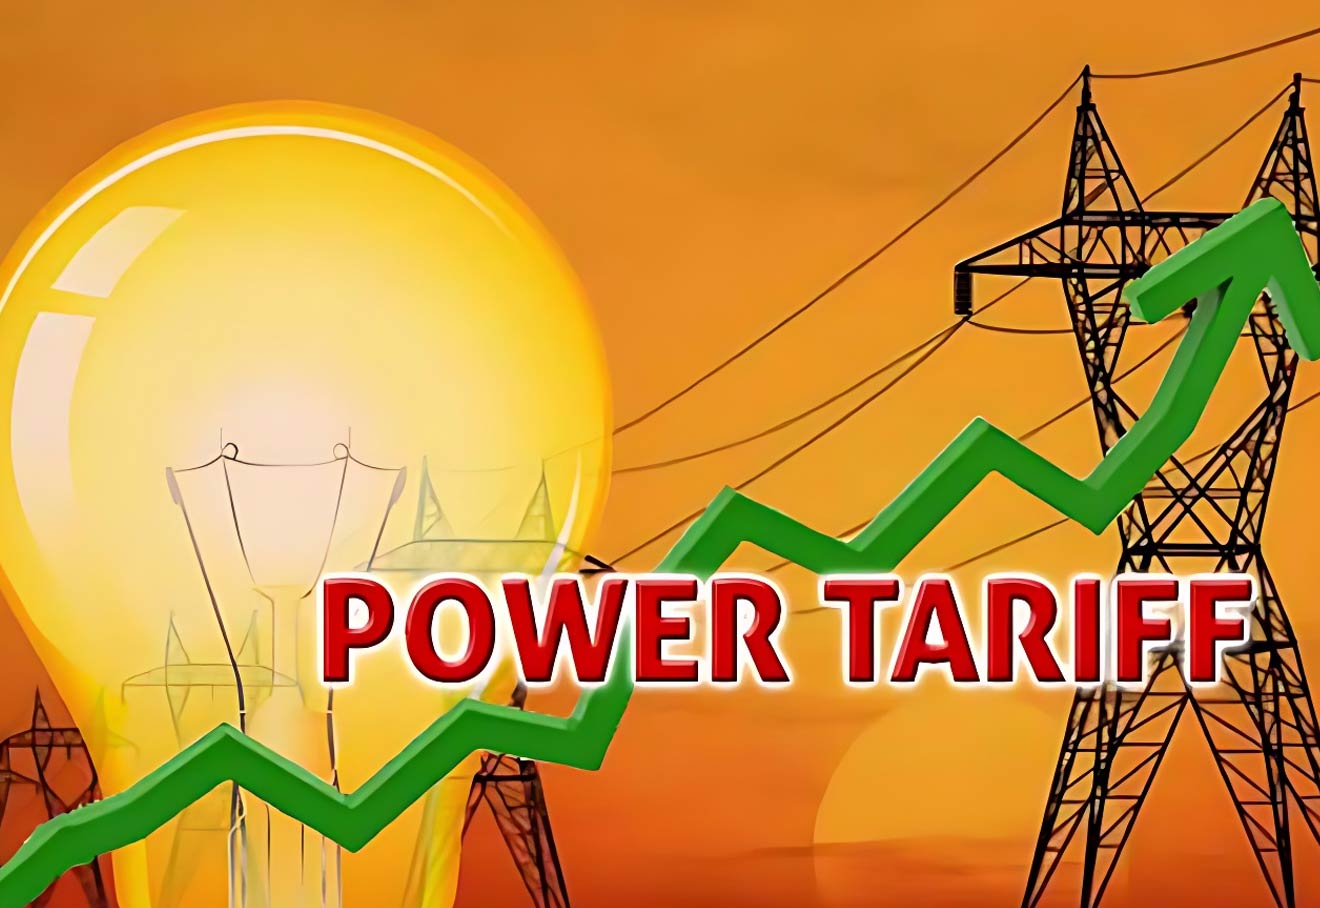 TN Associations To Observe One Day Strike On Sept 25 Against Power Tariff Hike